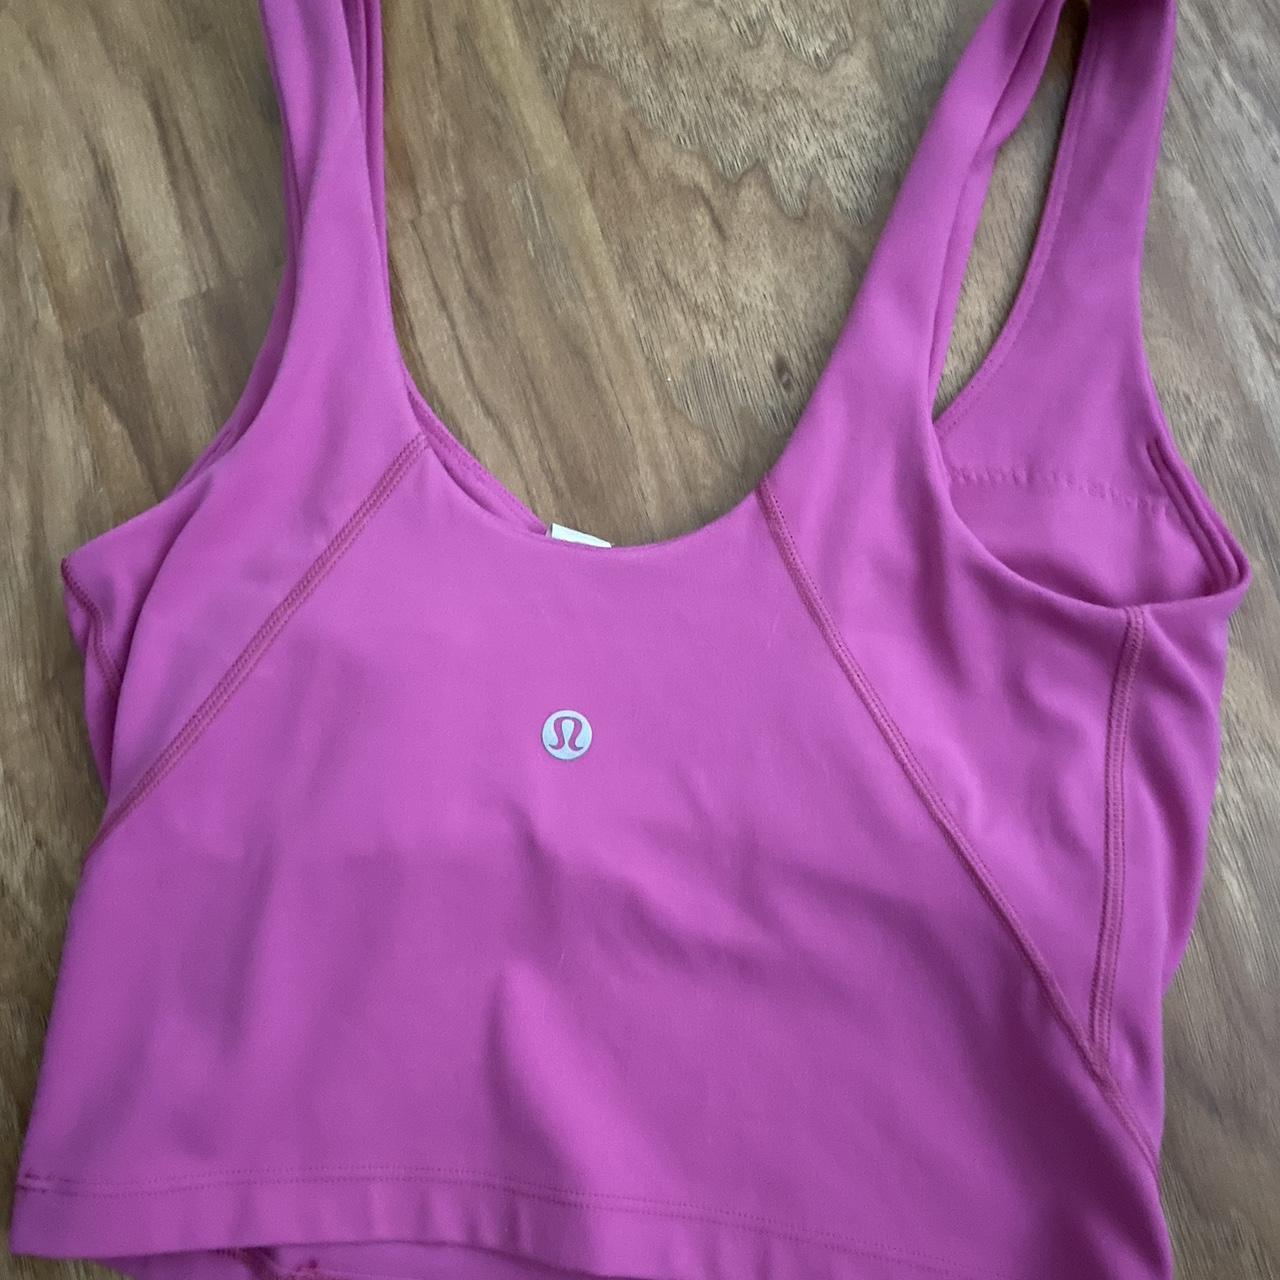 sonic pink align tank size 2. worn a few times and - Depop